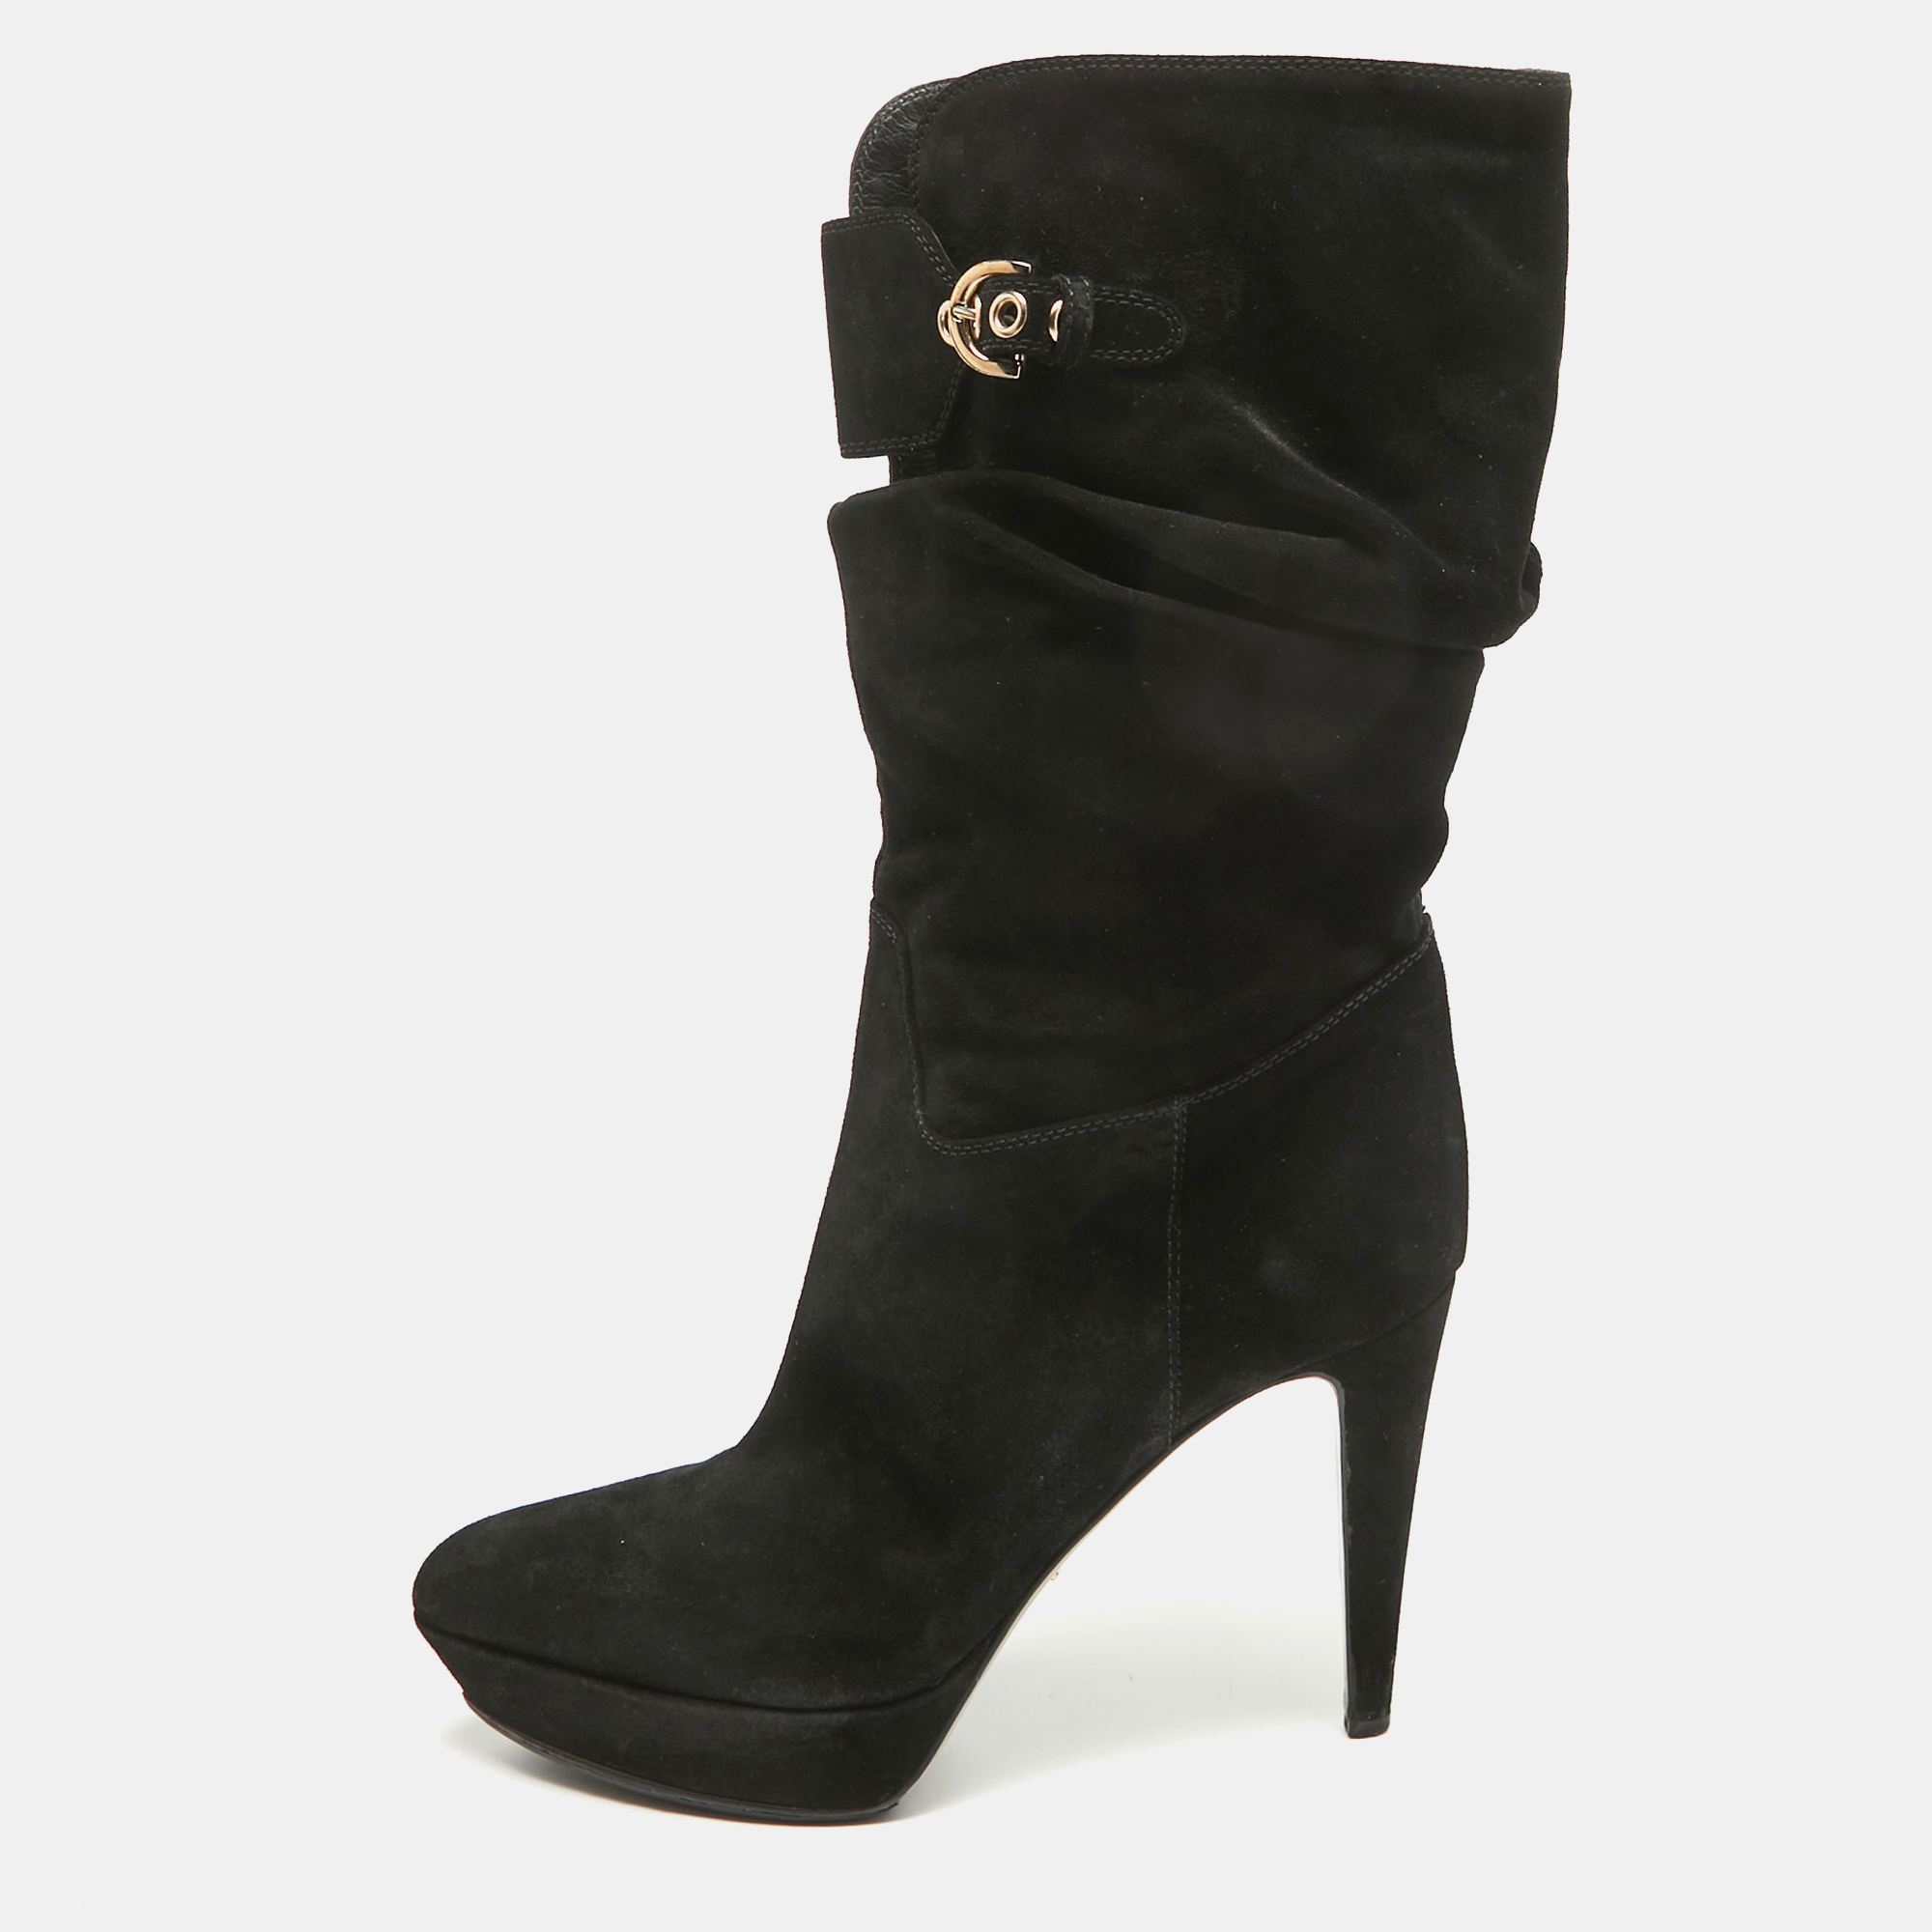 Sergio rossi black suede buckle mid calf boots size 40